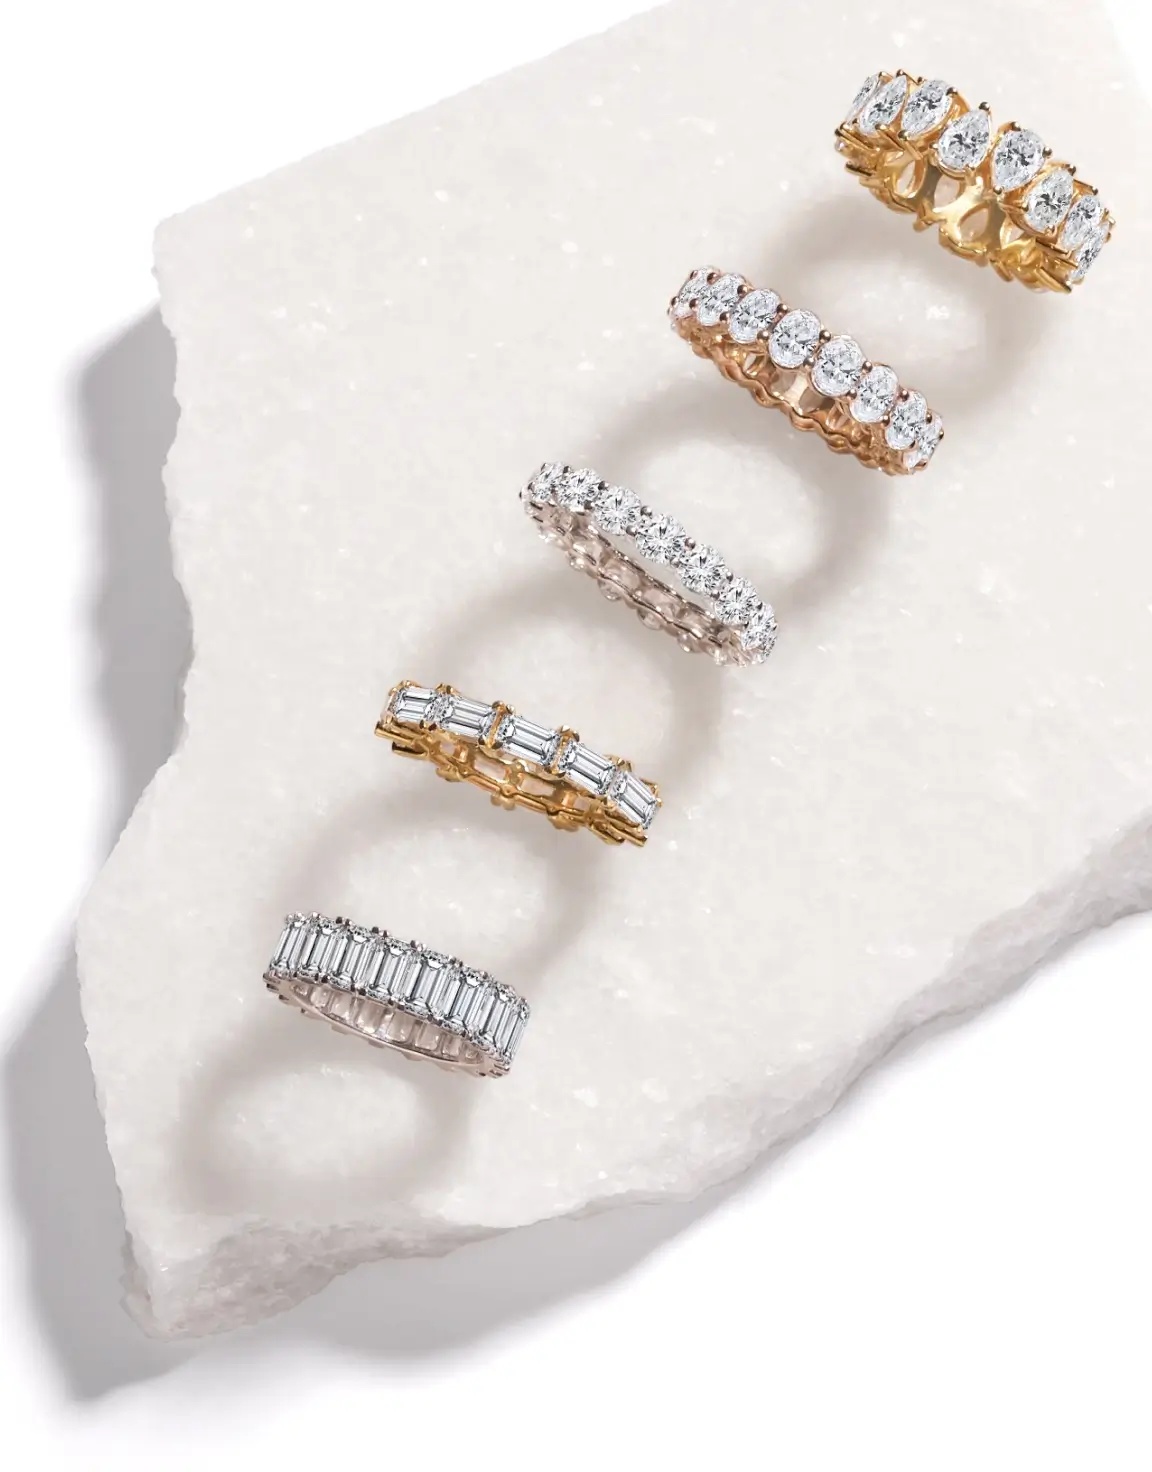 Discover more than 257 unique anniversary rings super hot